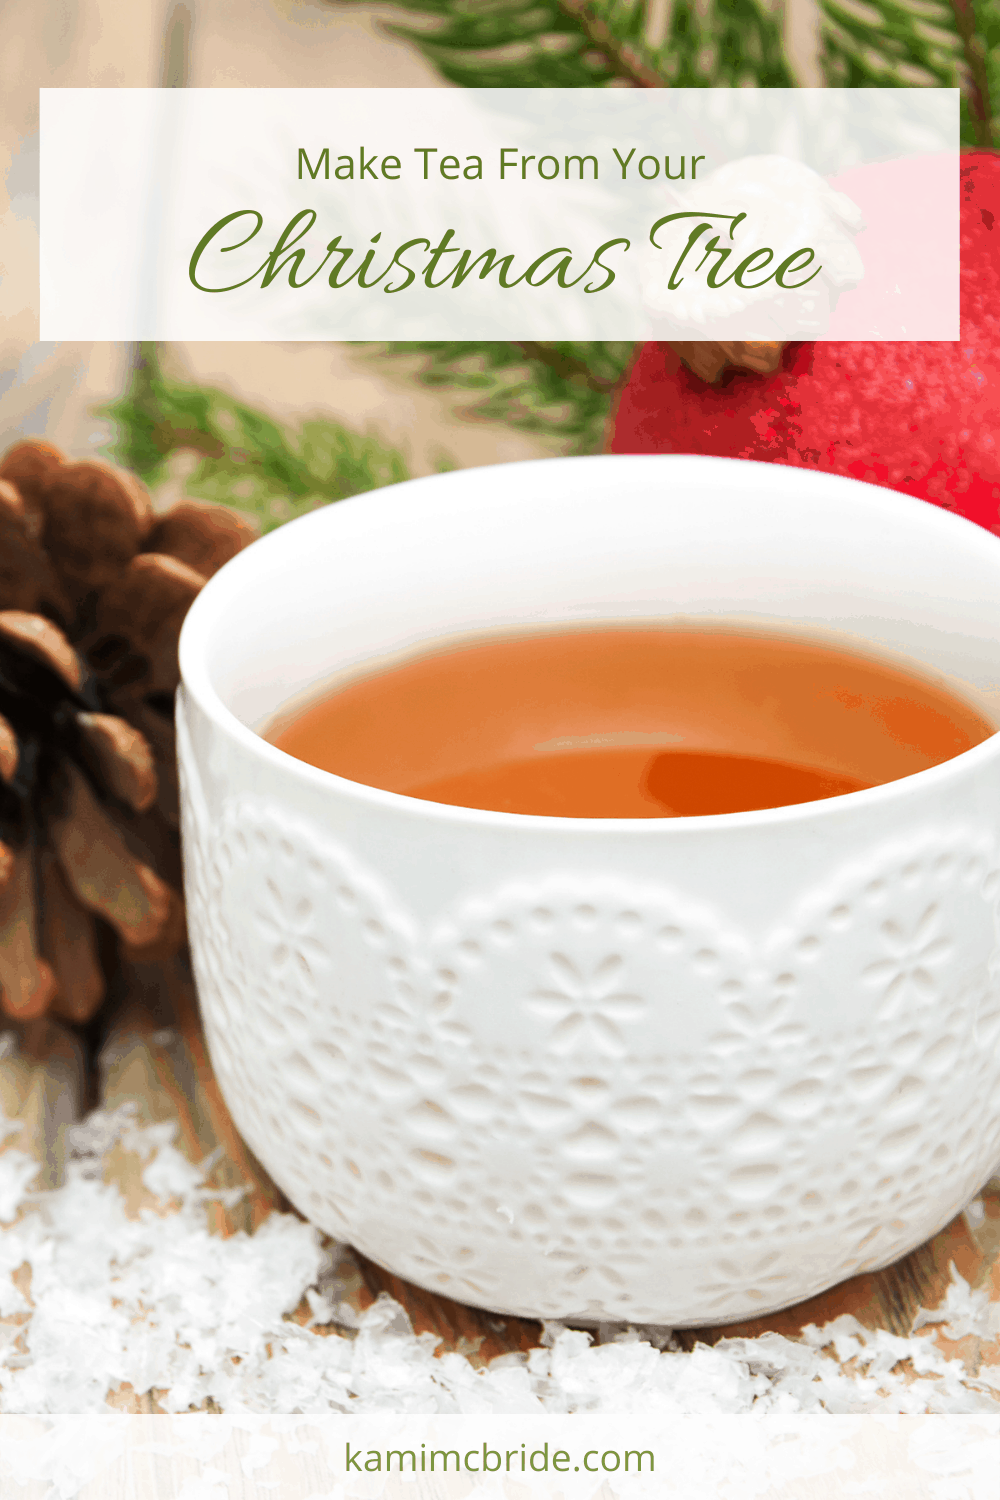 How to Make Tea From Your Christmas Tree